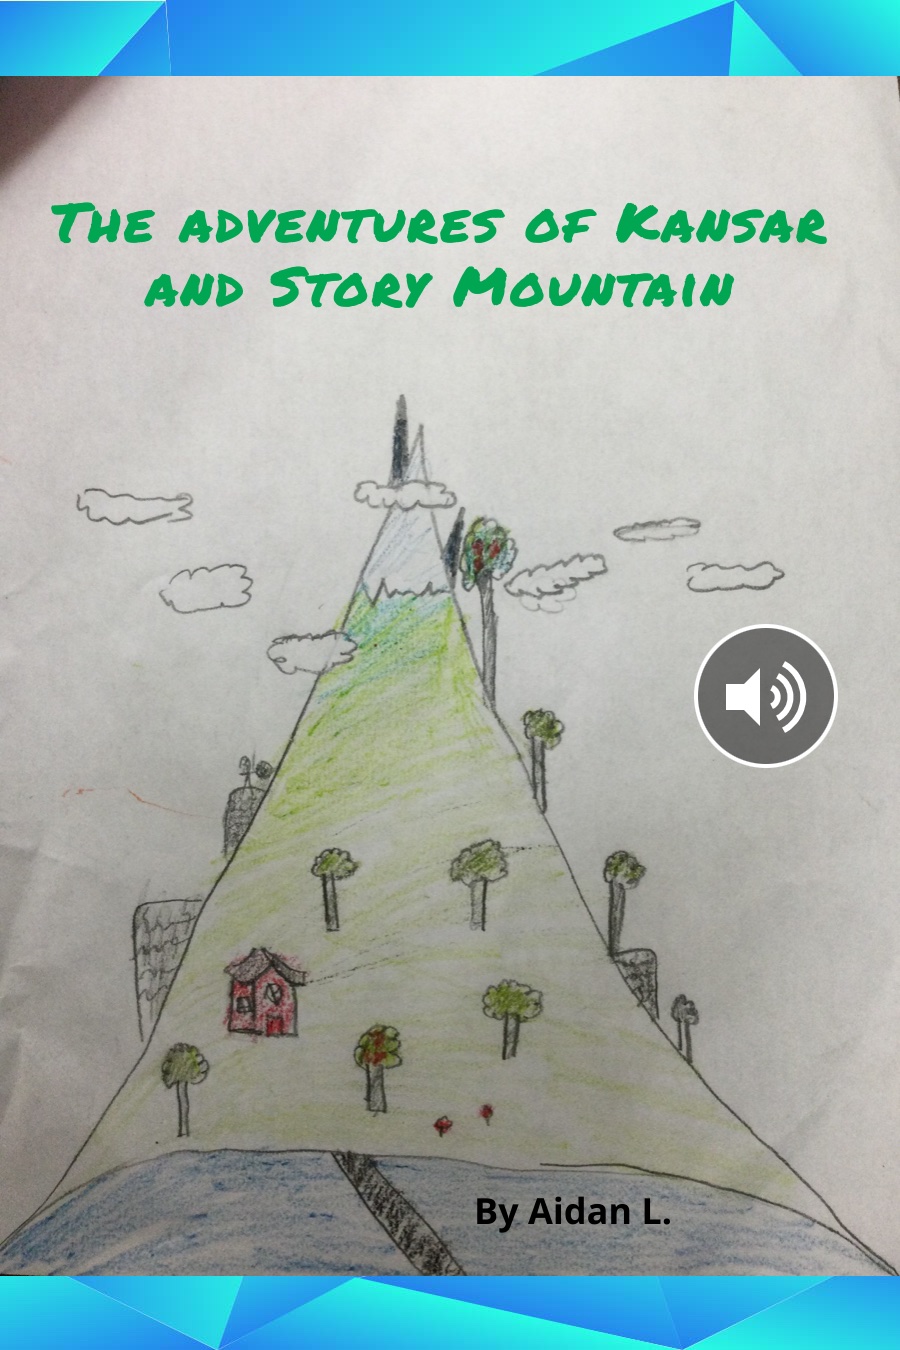 The Adventures of Kansar and Story Mountain by Aidan L